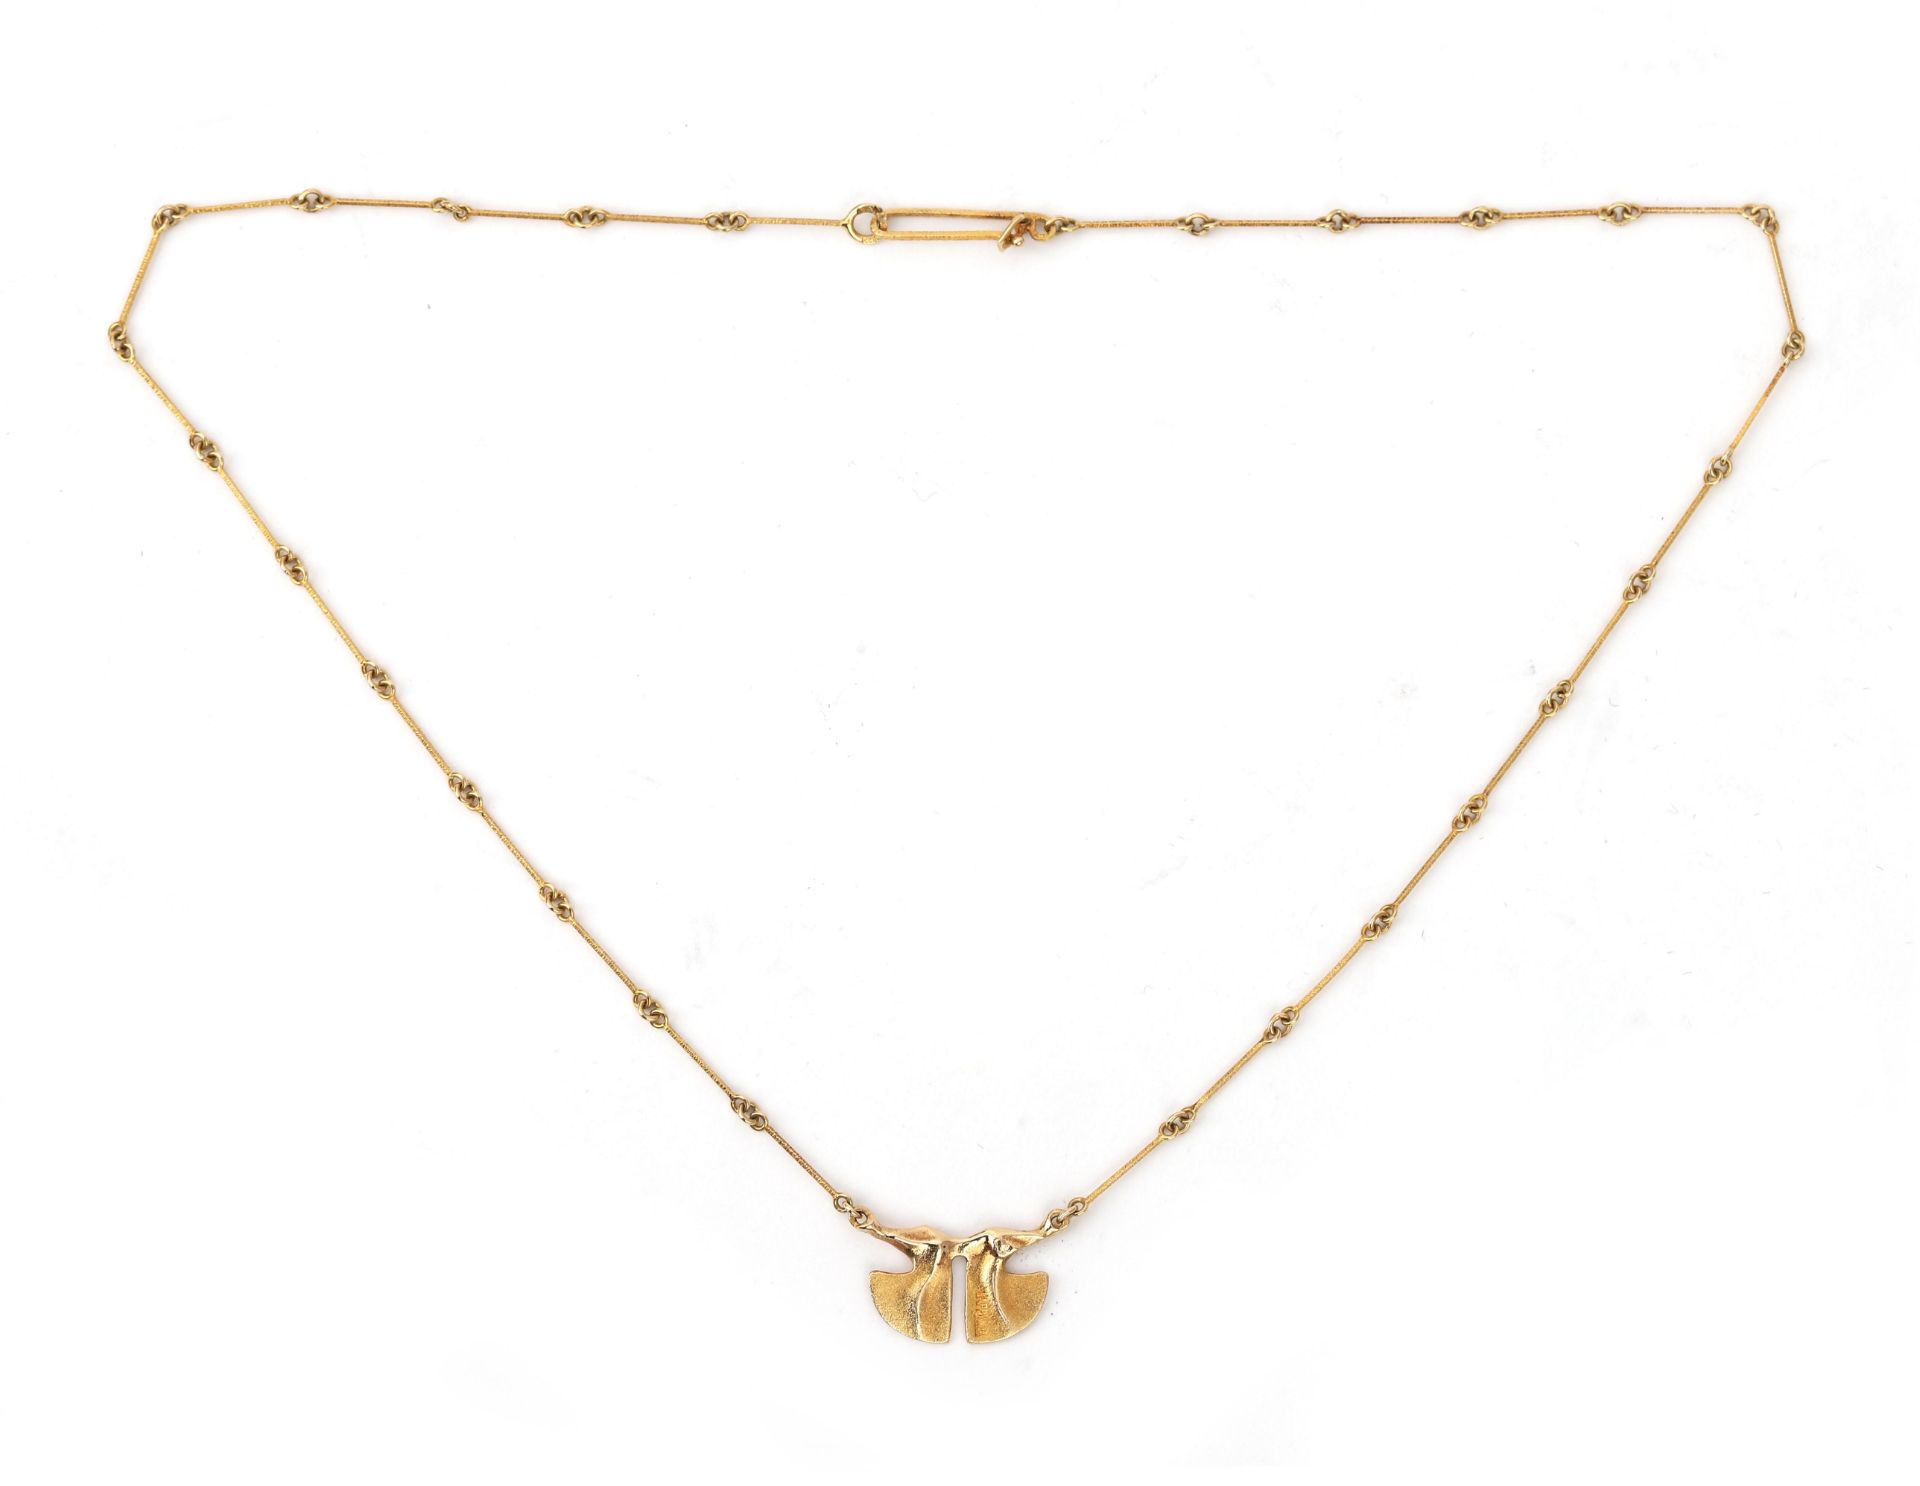 A 14 karat gold Lapponia necklace. An organic designed pendant, partly satiated gold suspended